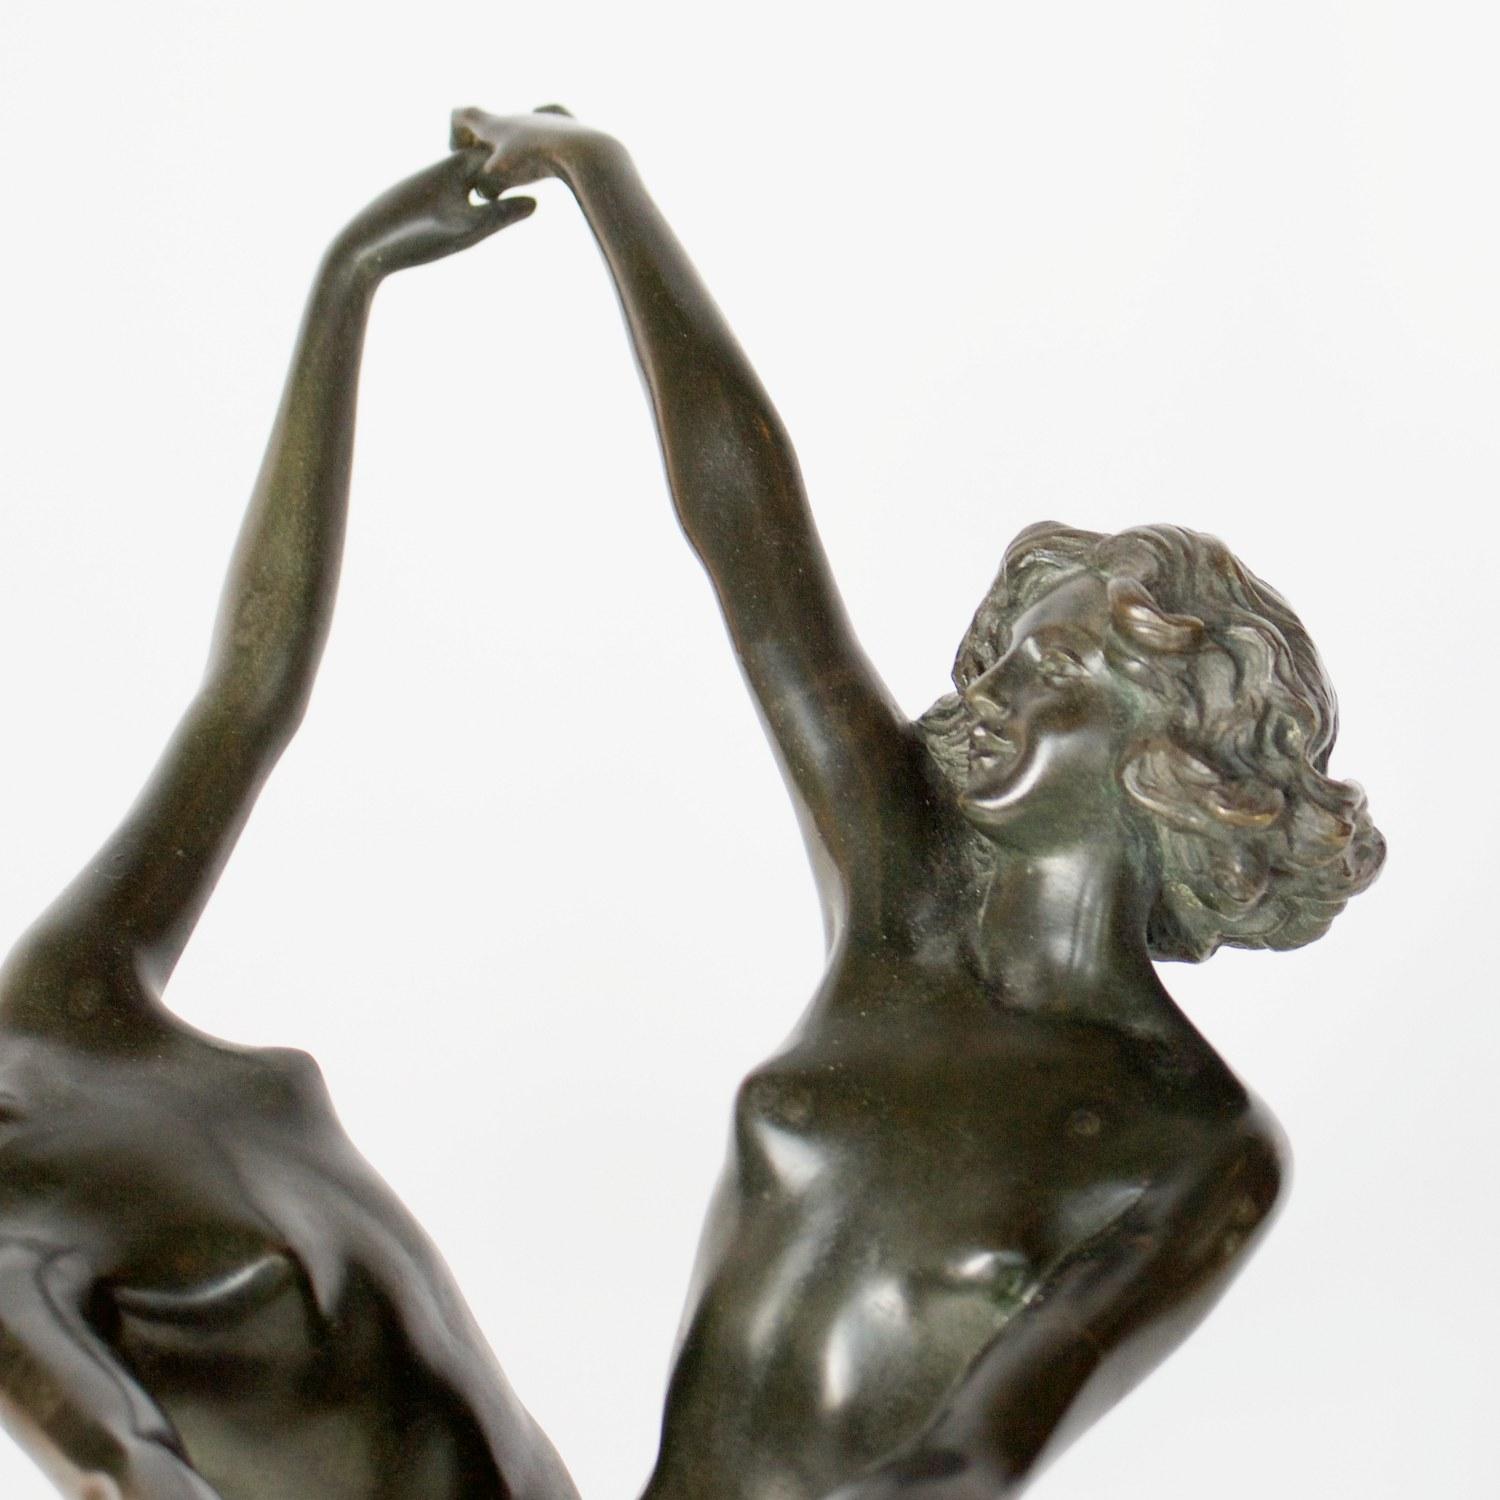 'Danse Pasterale' an Art Deco bronze sculpture by Claire Jeanne Roberte Colinet, depicting two intertwined dancing ladies. Original dark green bronze patination. Set over a variegated marble base with cast gilt bronze reliefs of 'Pan with Pipes' and